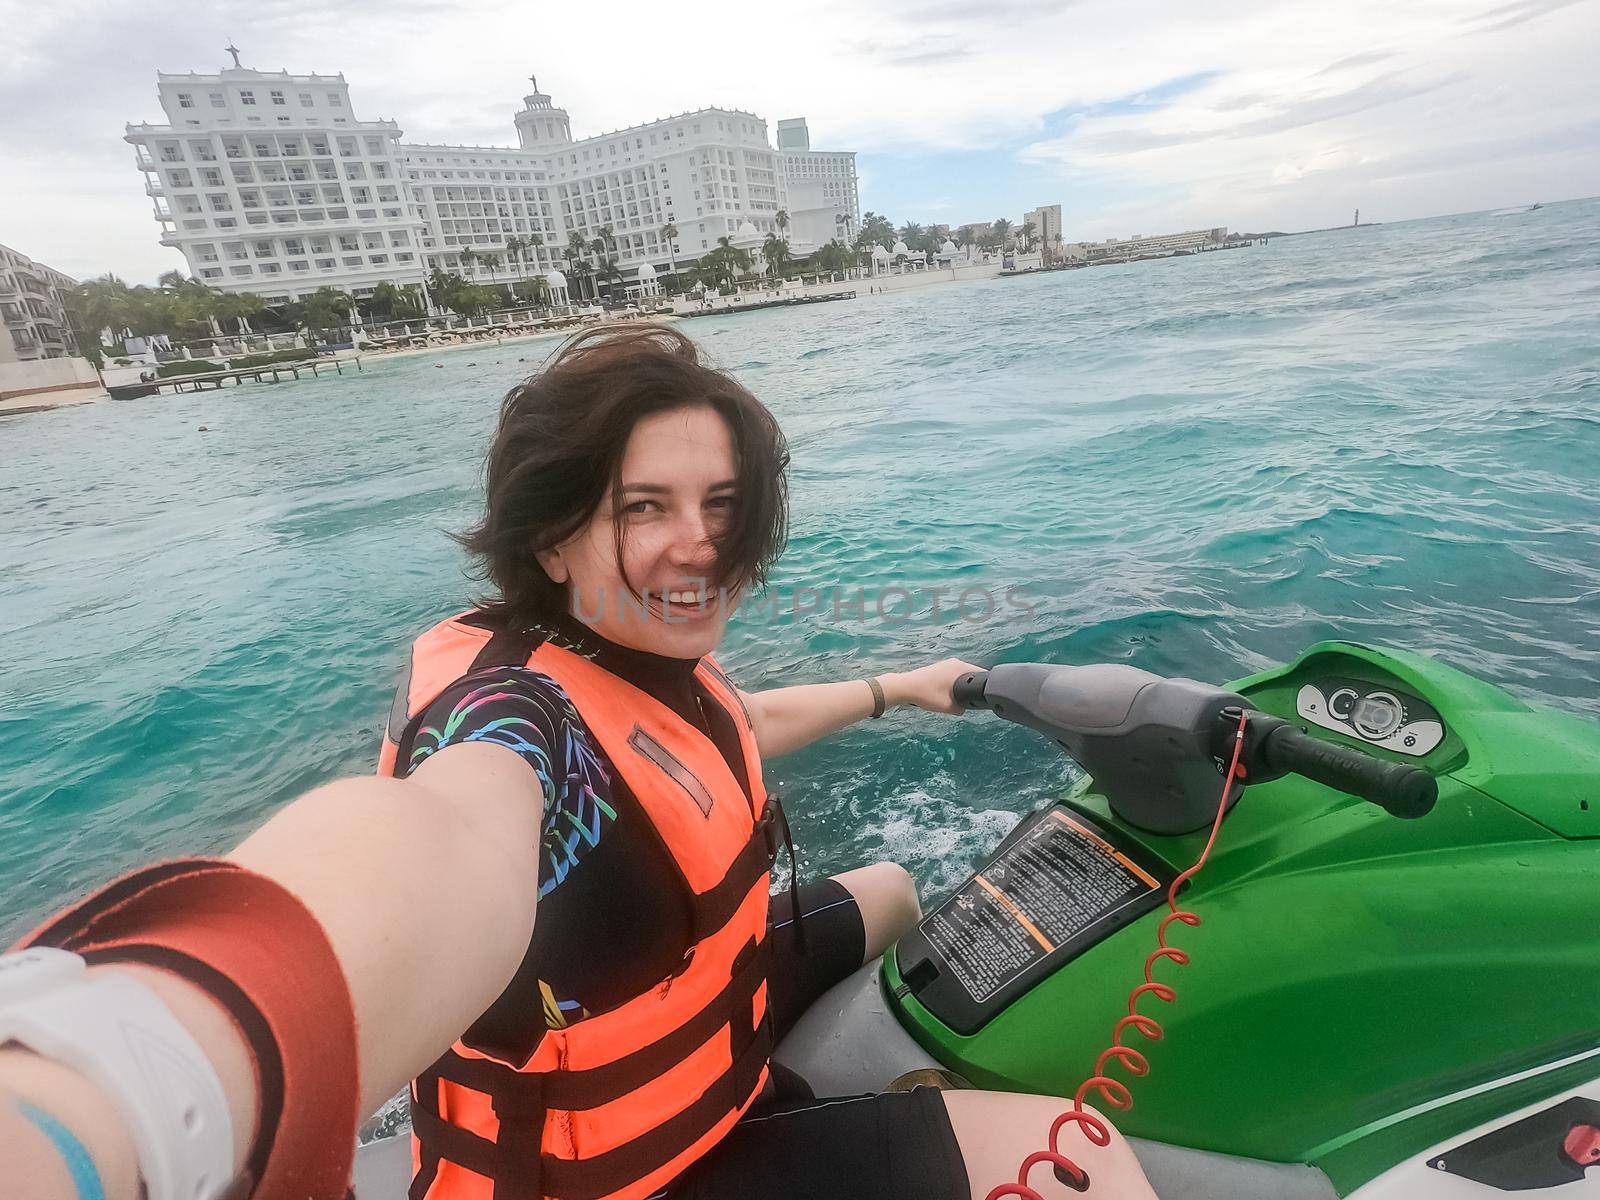 Woman making selfie photo while riding jet ski on Caribbean sea resort. Concept of having fun on summer vacation